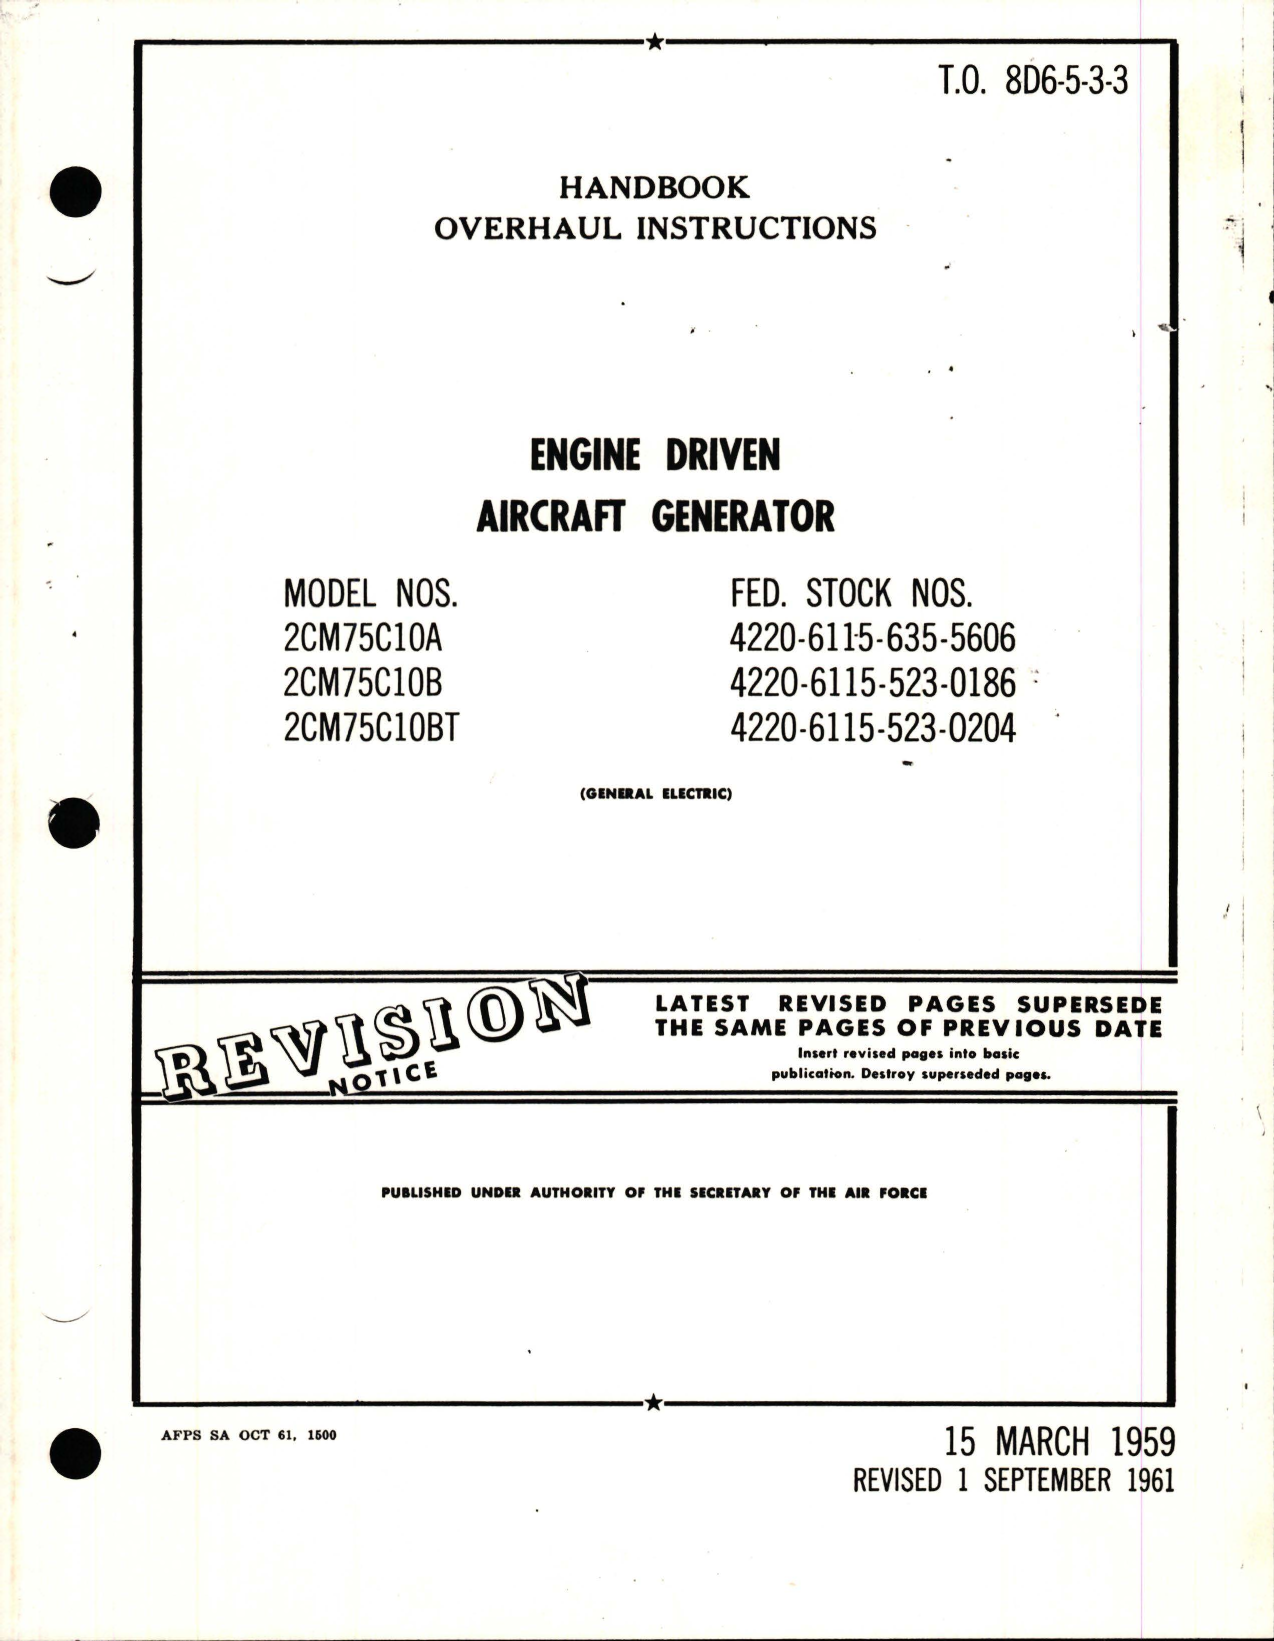 Sample page 1 from AirCorps Library document: Overhaul Instructions for Engine Driven Generator - Models 2CM75C10A, 2CM75C10B, and 2CM75C10BT 